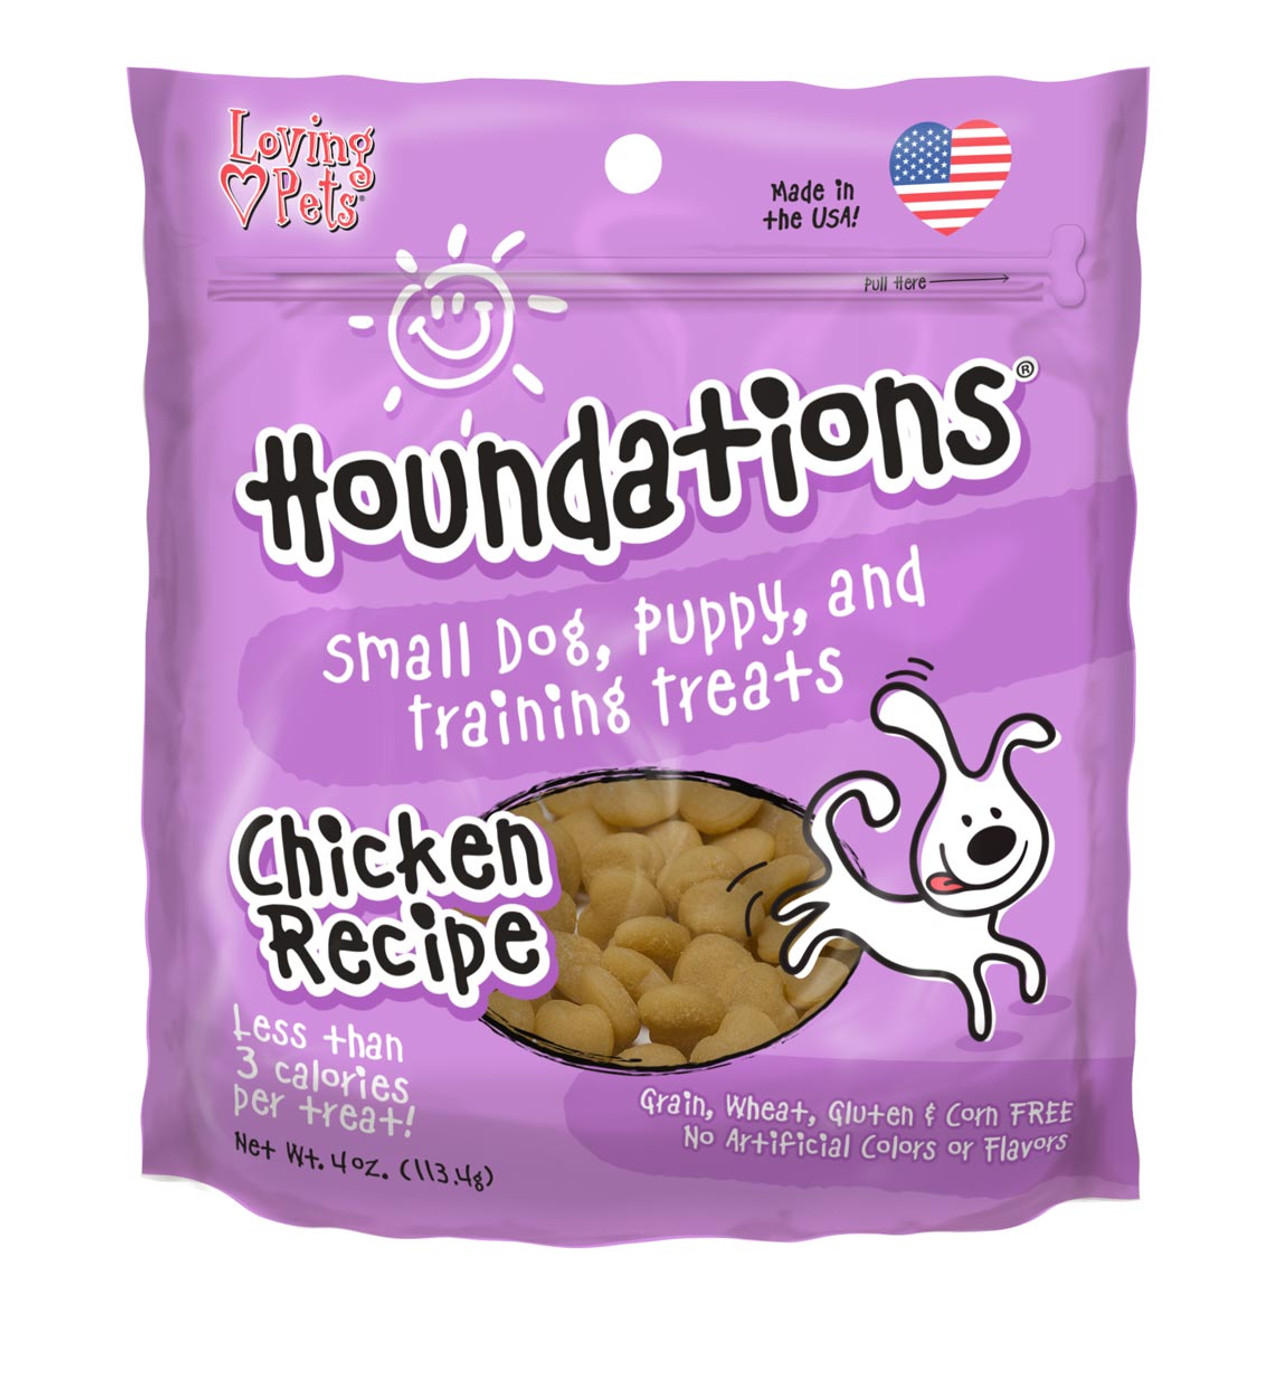 https://cdn11.bigcommerce.com/s-i8rmeakles/images/stencil/1280w/products/527/1172/Copy_of_Houndations-CHICKEN-sim-2019_2__55907.1644961832.jpg